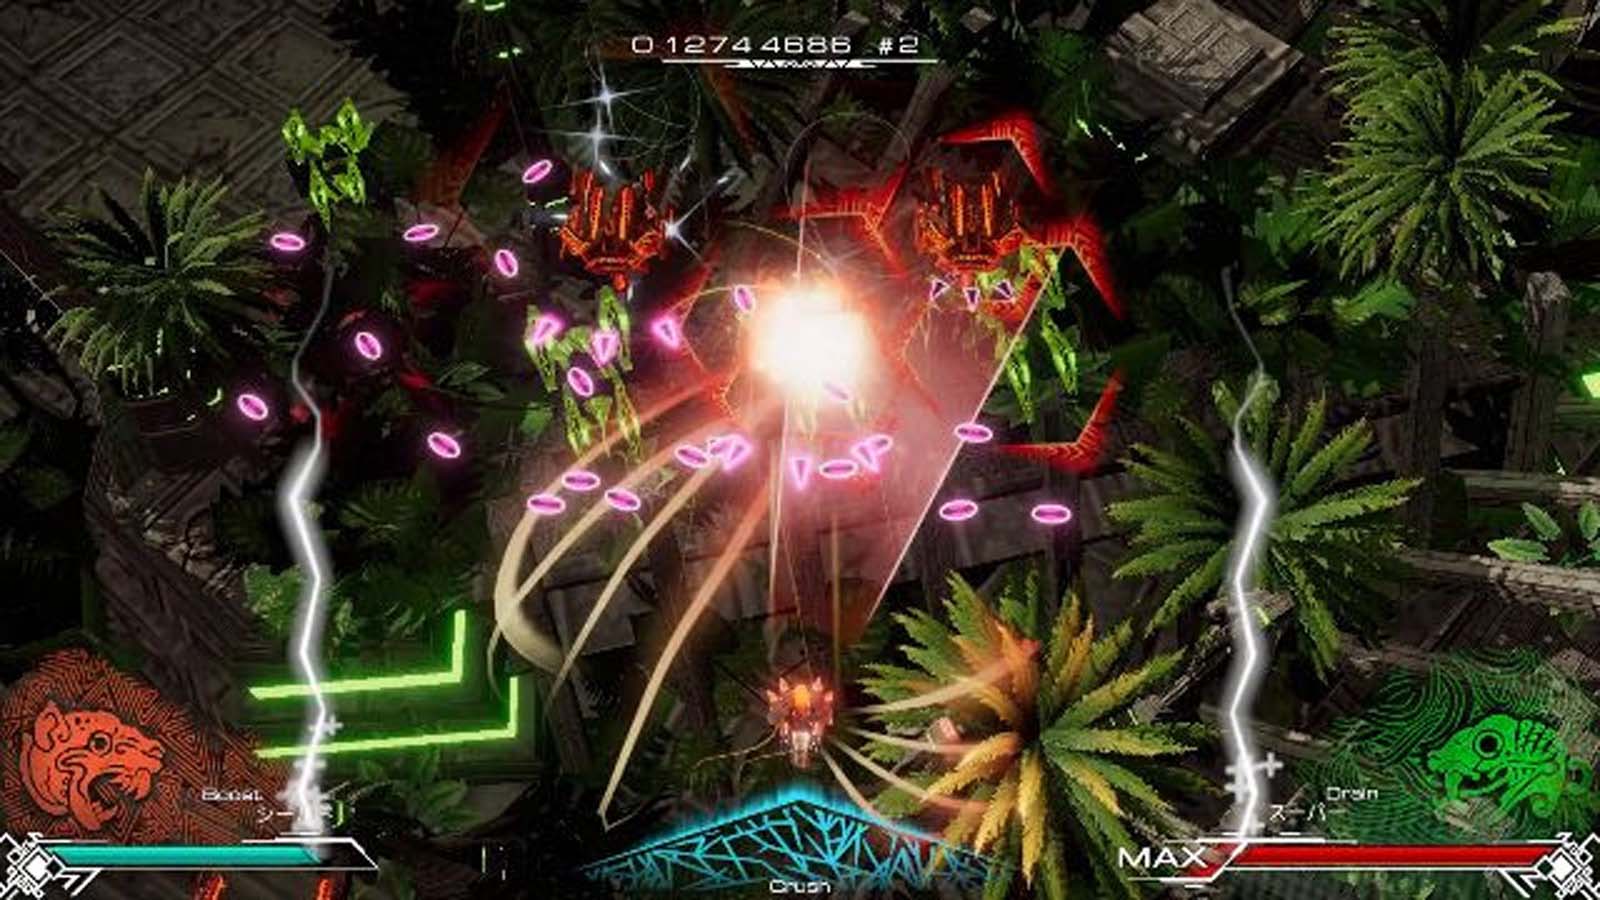 Neo-Aztec Shootem Up Pawarumi Coming to PS4 in February 2020